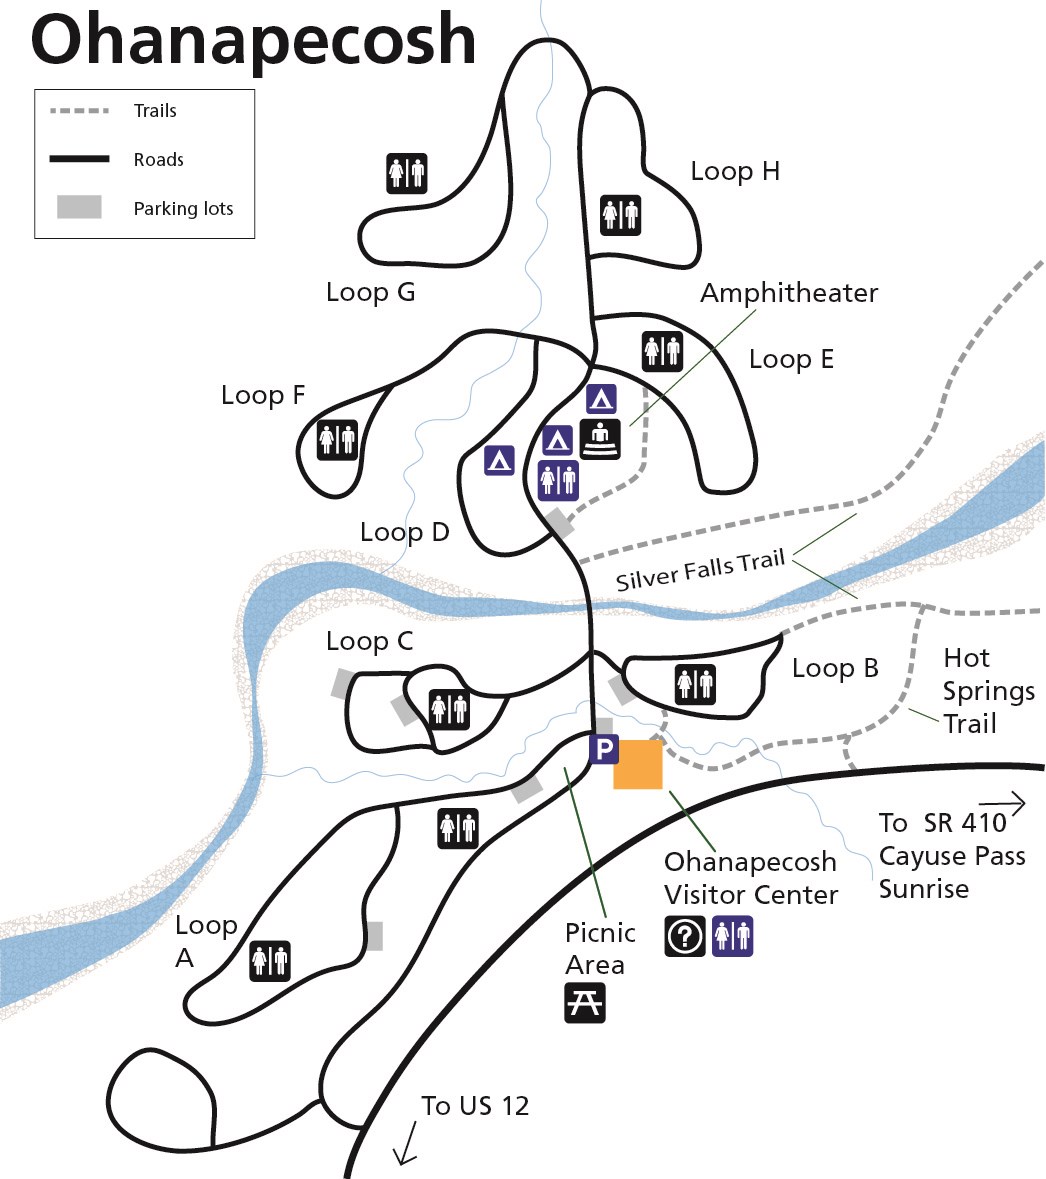 A simplified map of the accessible features at Ohanapecosh